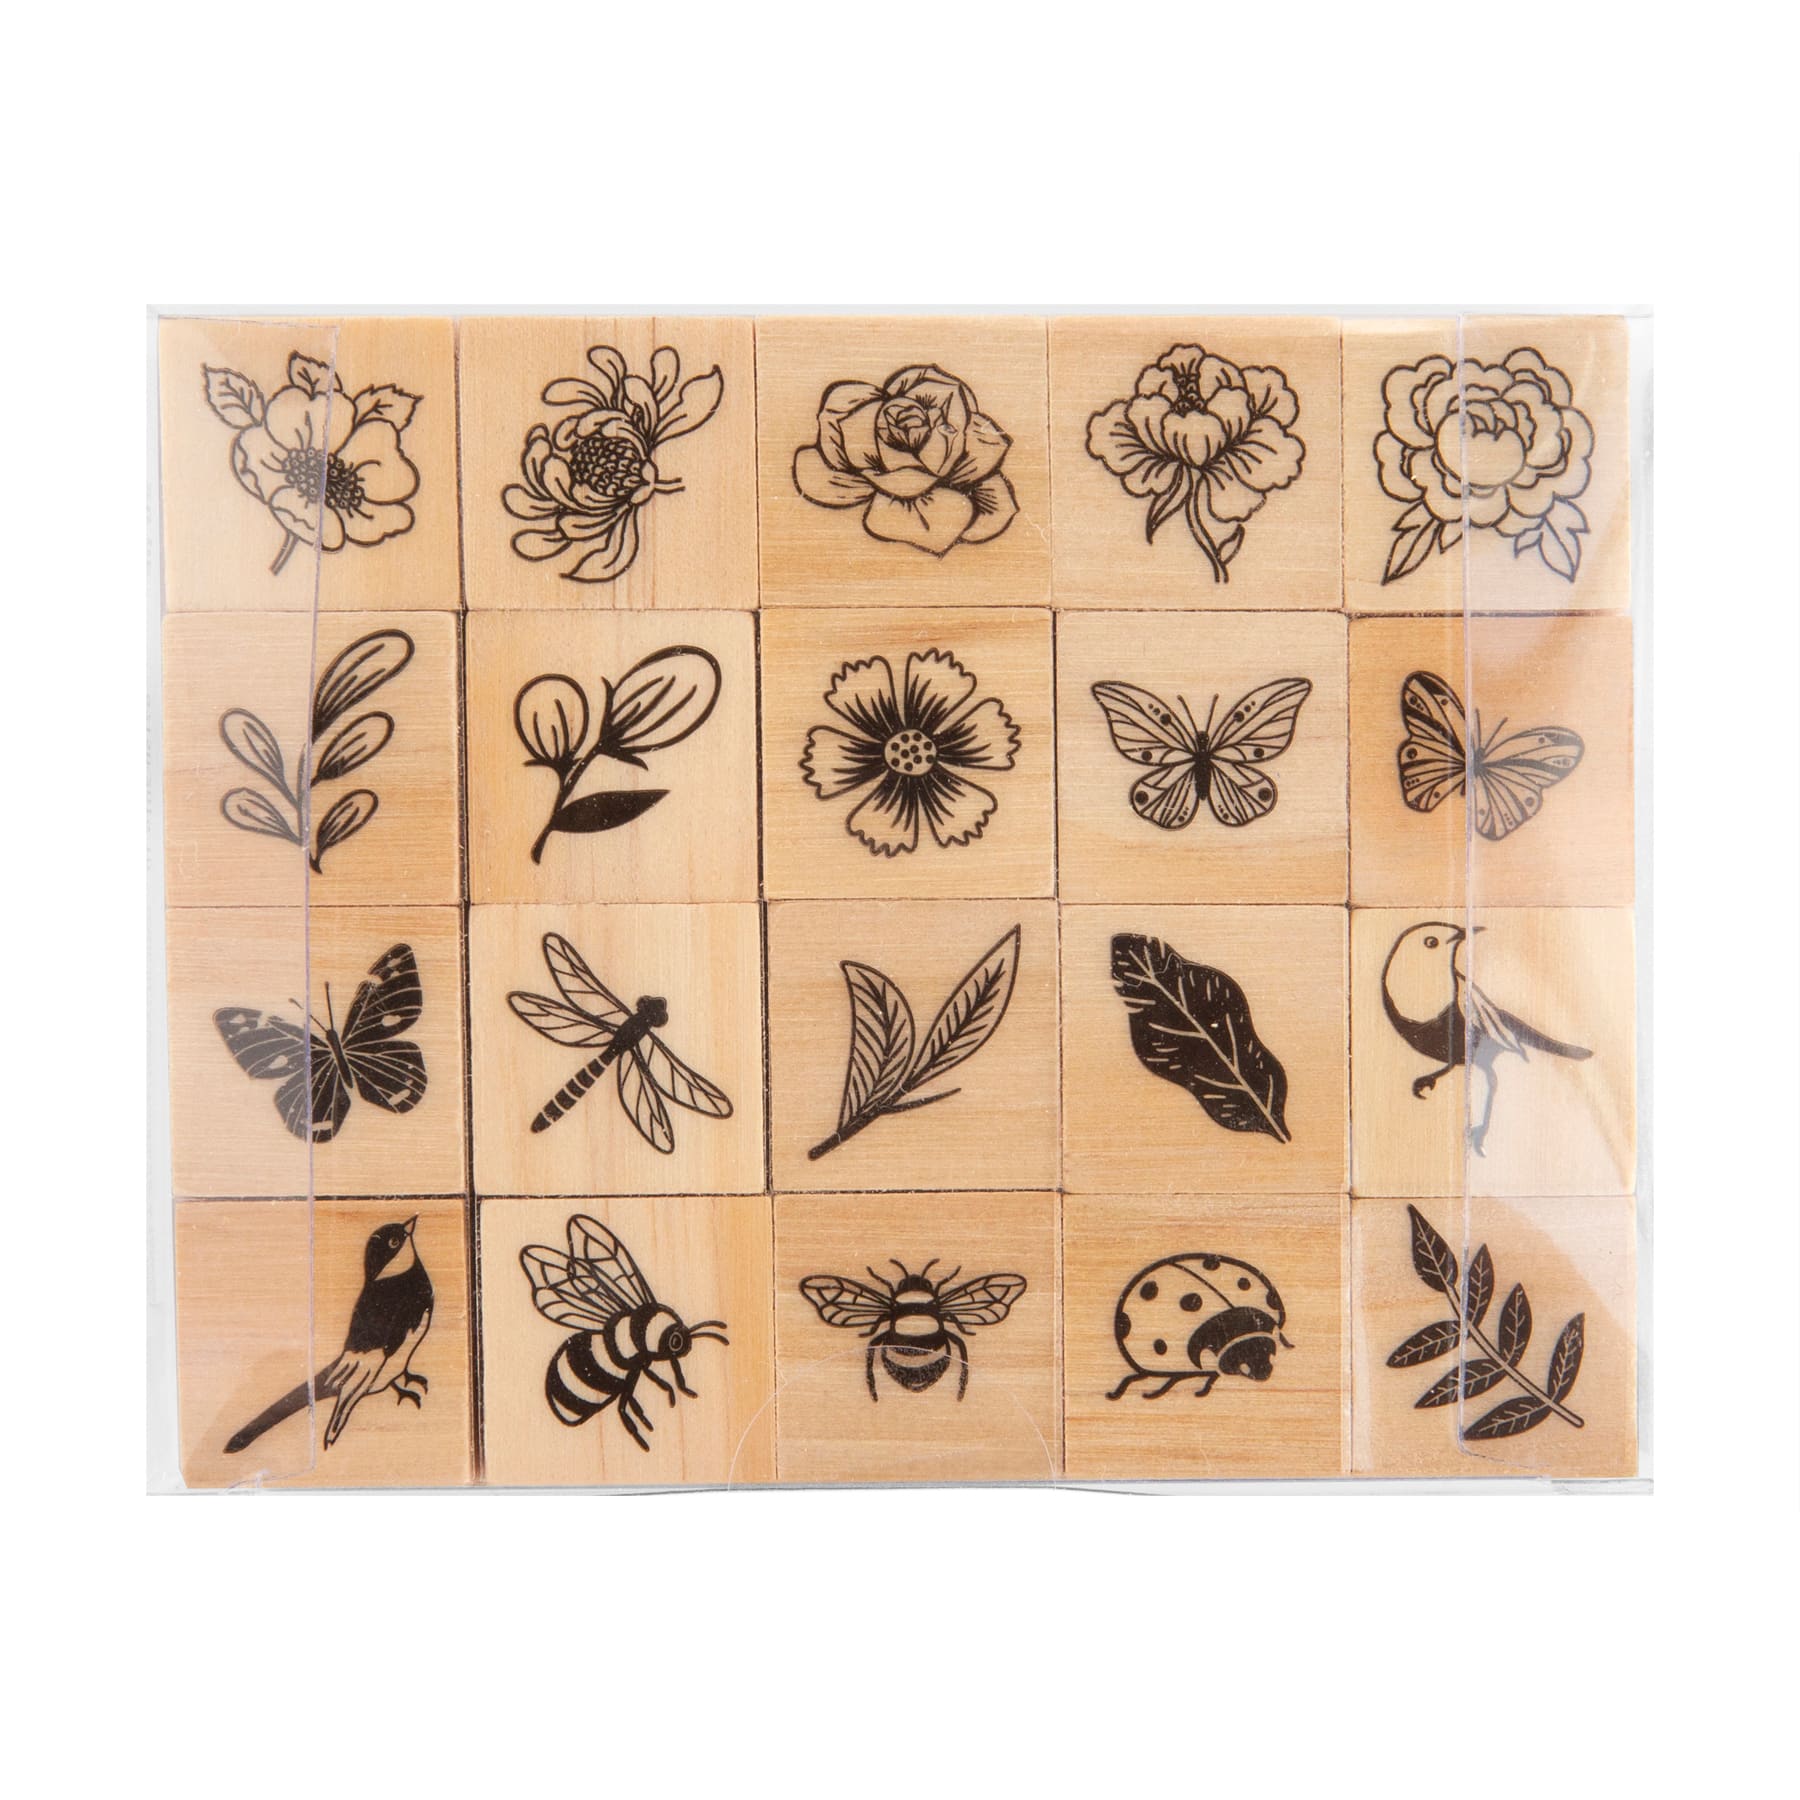 Stamp Carving Kit by Recollections™, Michaels